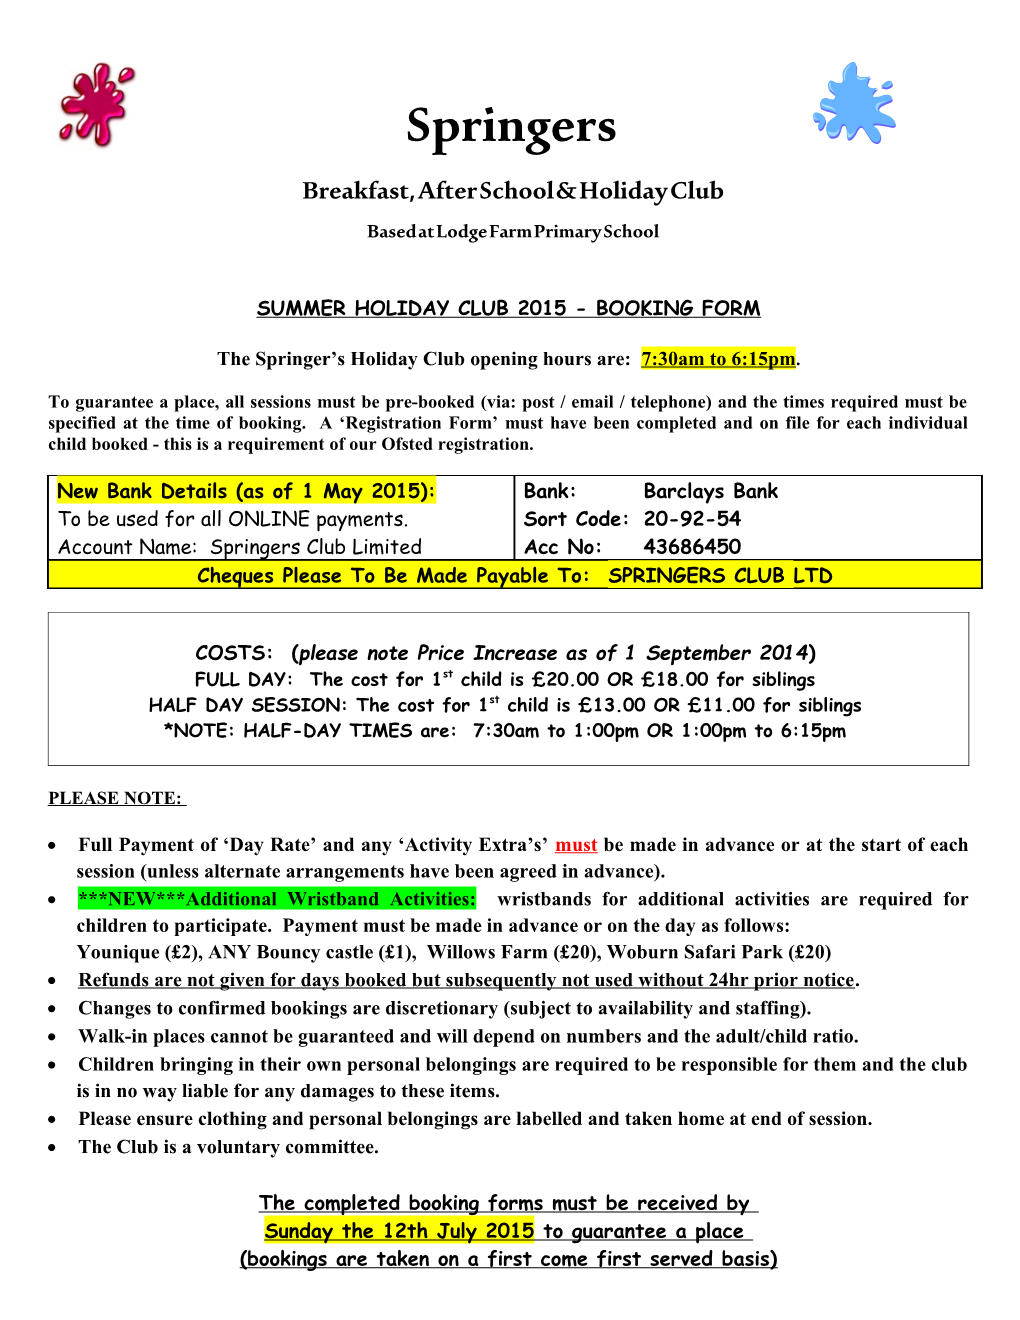 Summer Holiday Club 2015 - Booking Form